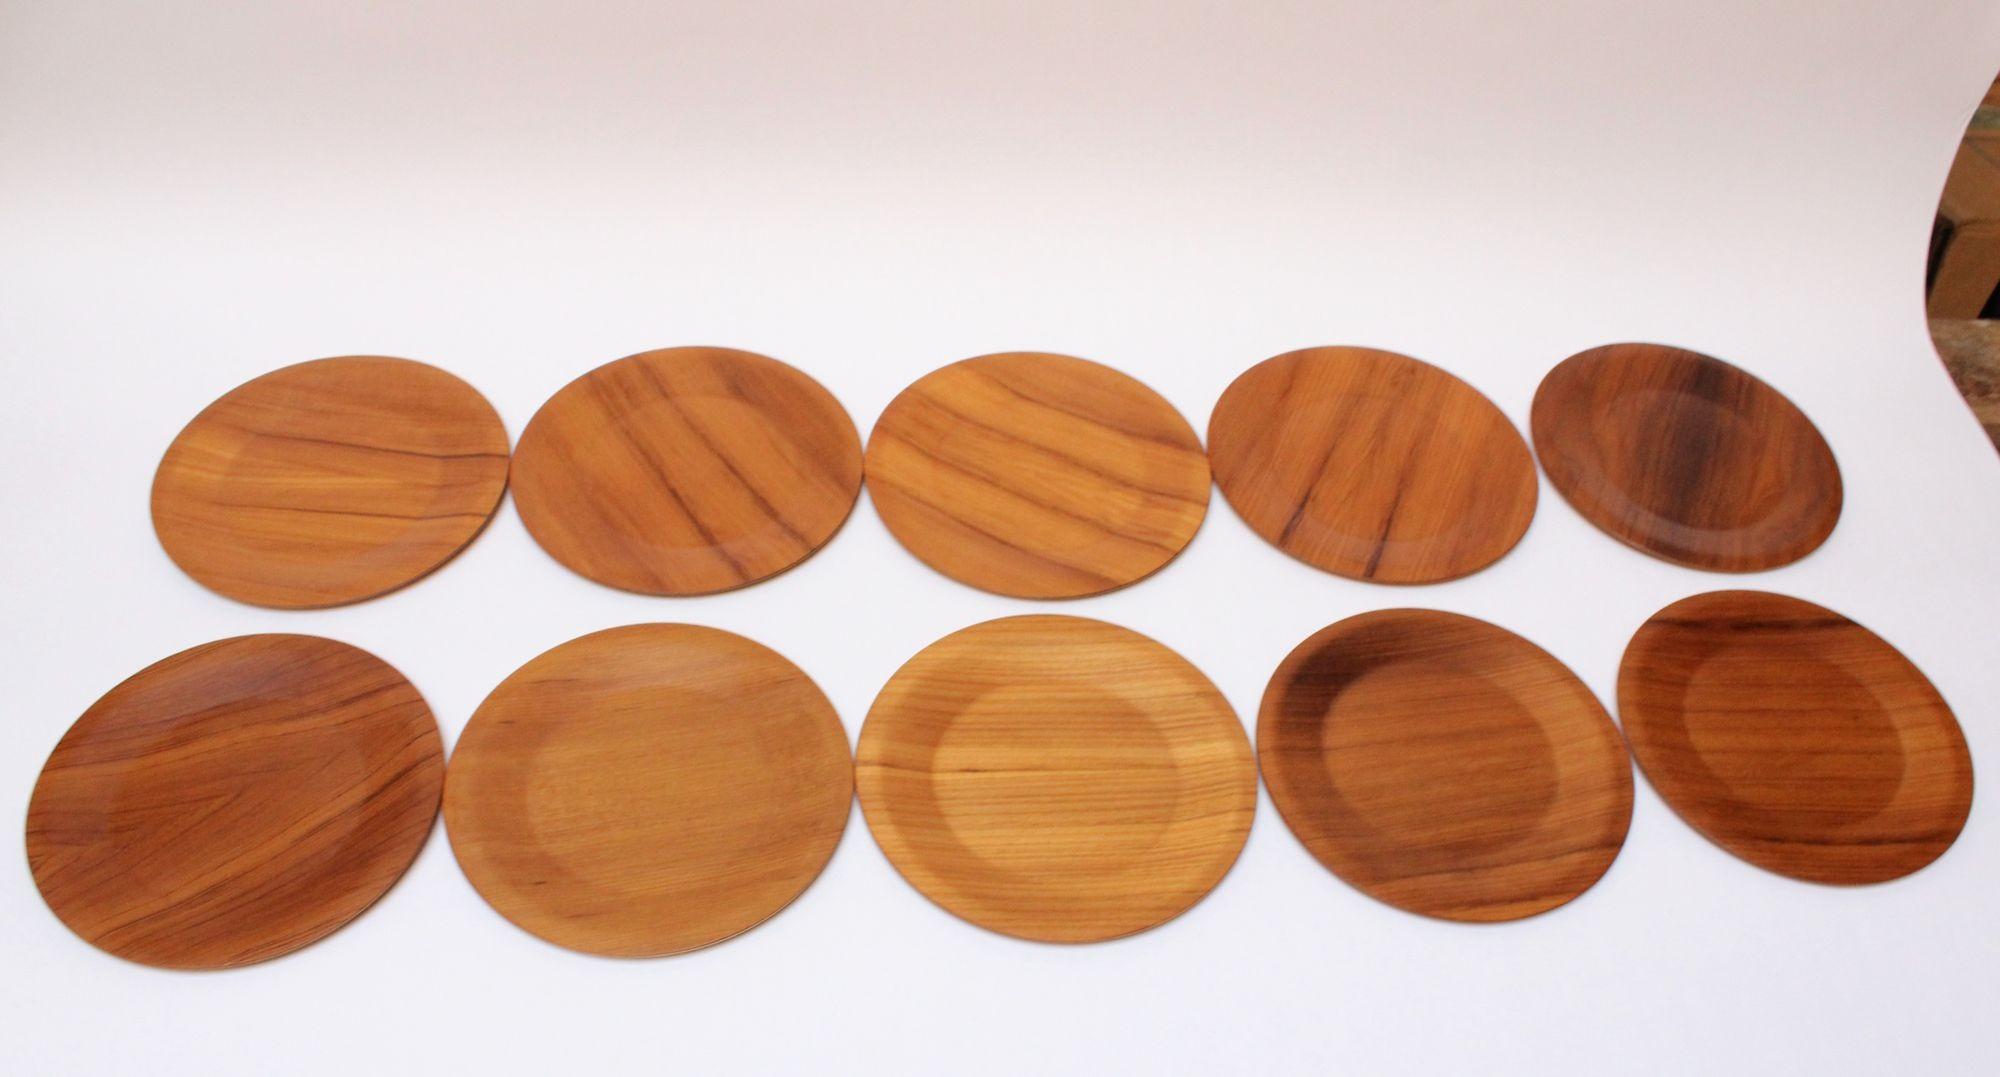 Beautiful and complete set of ten teak plates manufactured in the 1960s by Langva of Denmark.
Slight variations in tone and wood grain along with surface scuffs to some plates, as shown.
Eight of the ten plates retain the 